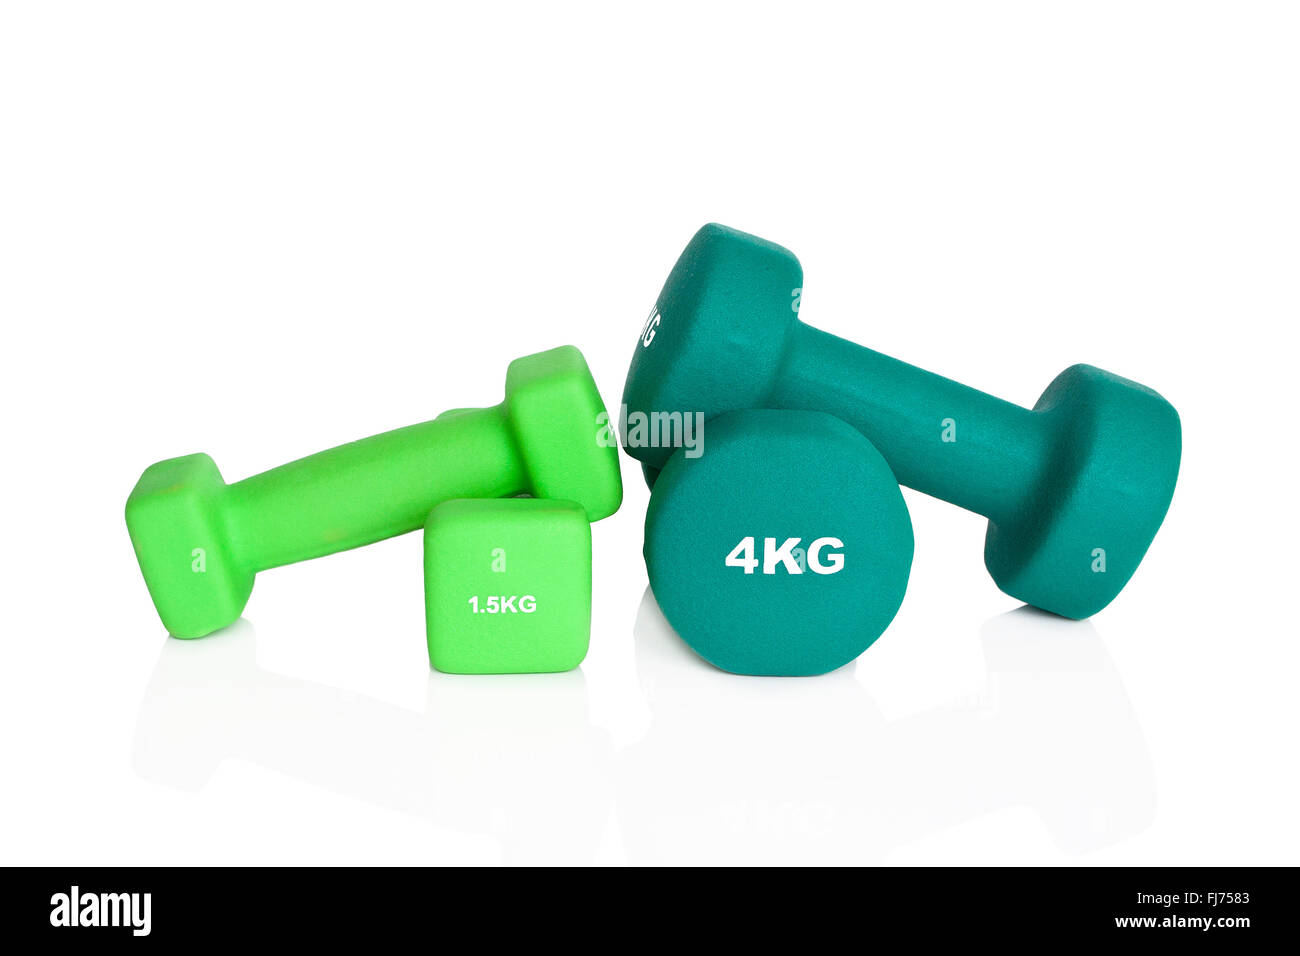 Green 4kg and 1.5kg dumbbells isolated on white background. Weights for a fitness training. Stock Photo